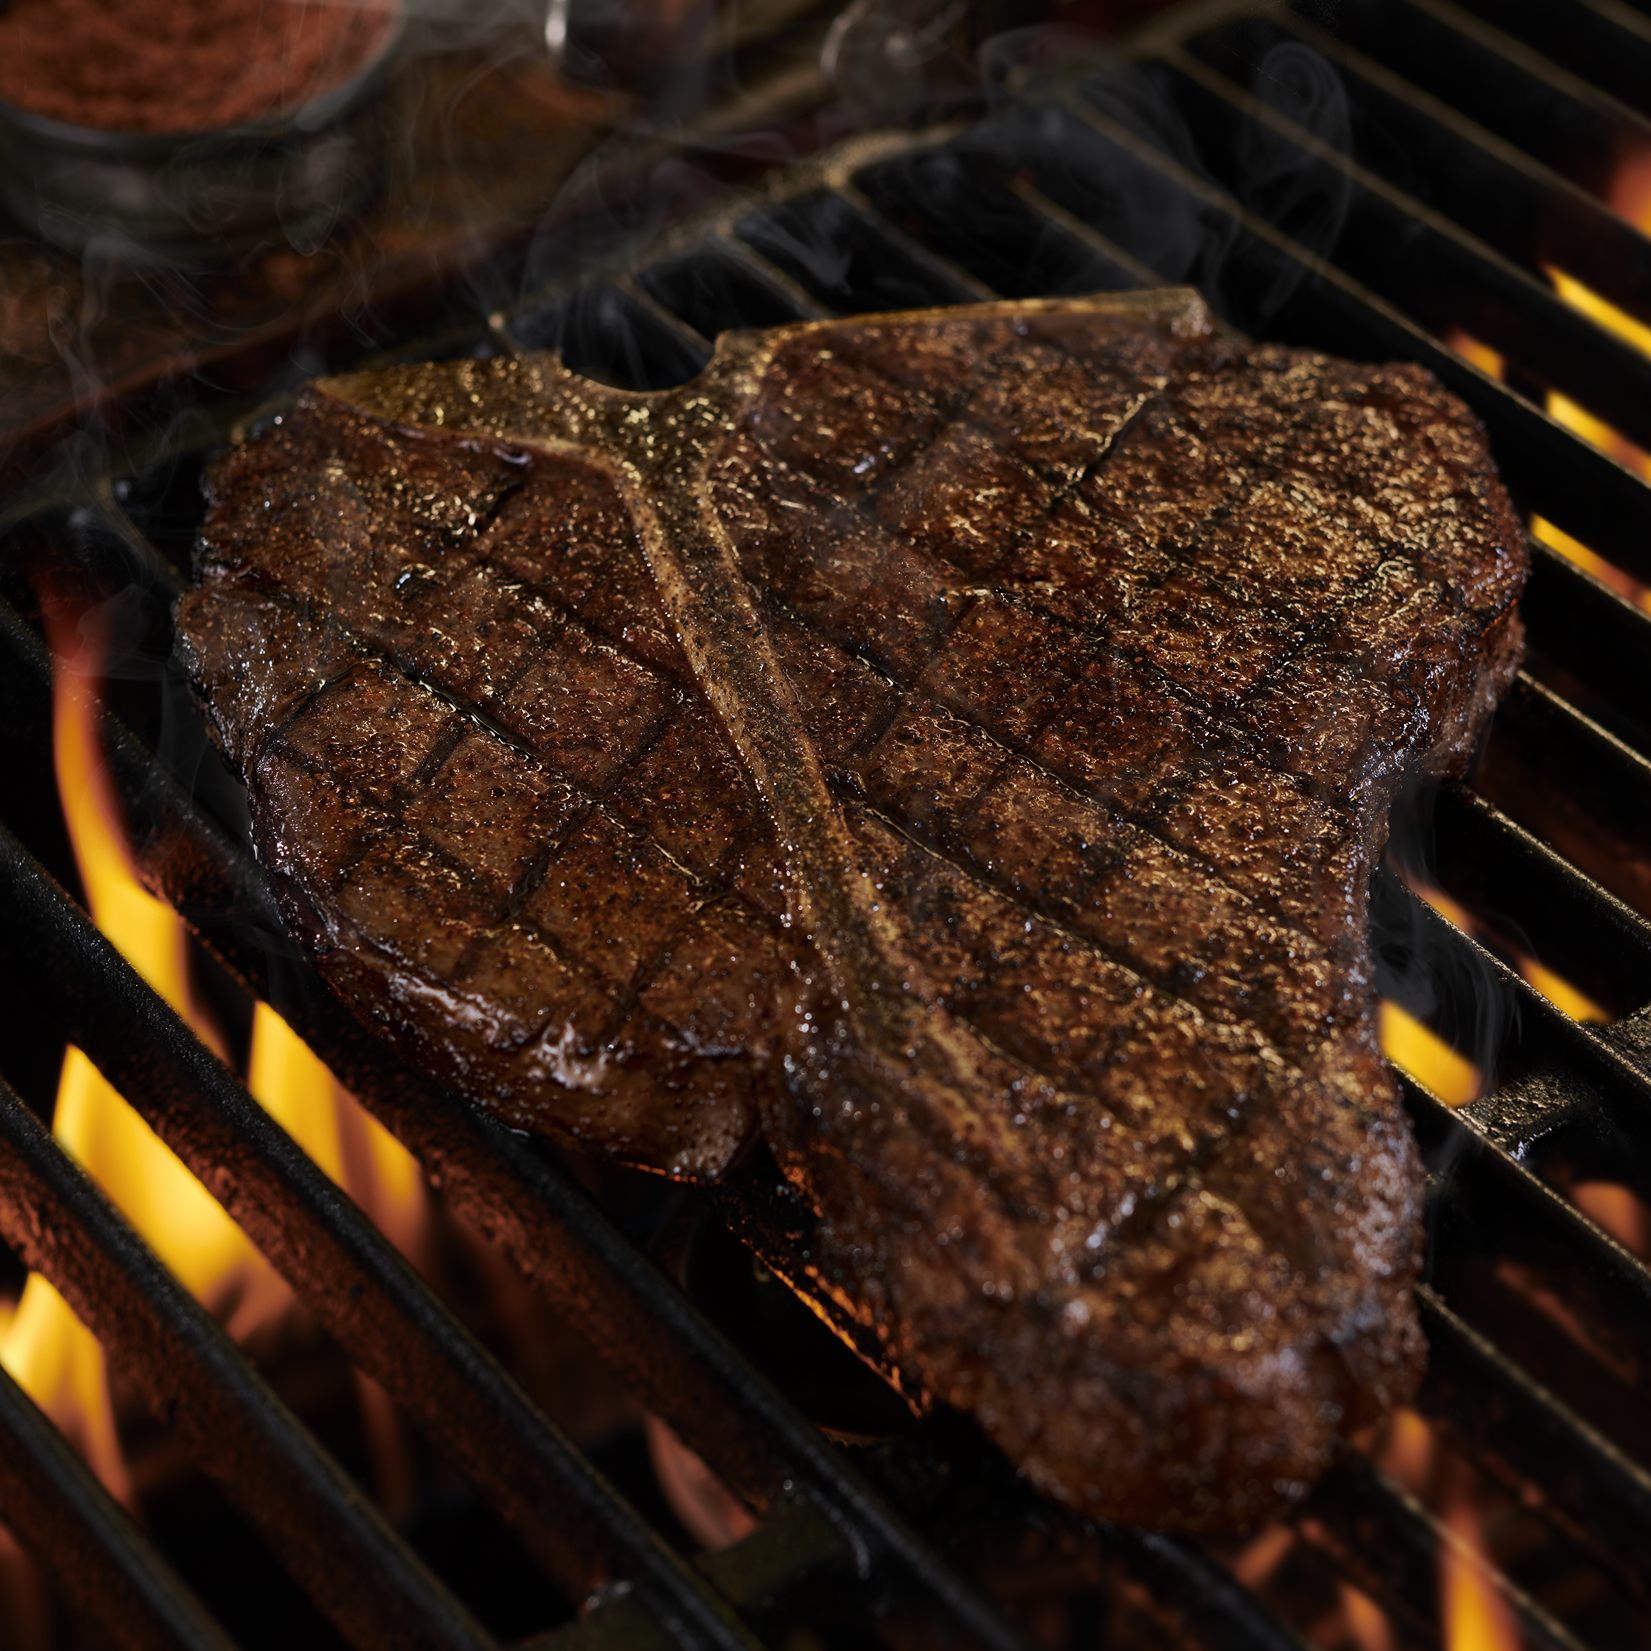 Got the biggest steak in the game wearing our name! The LongHorn porterhouse combines a bone-in stri LongHorn Steakhouse Denton (940)220-2147